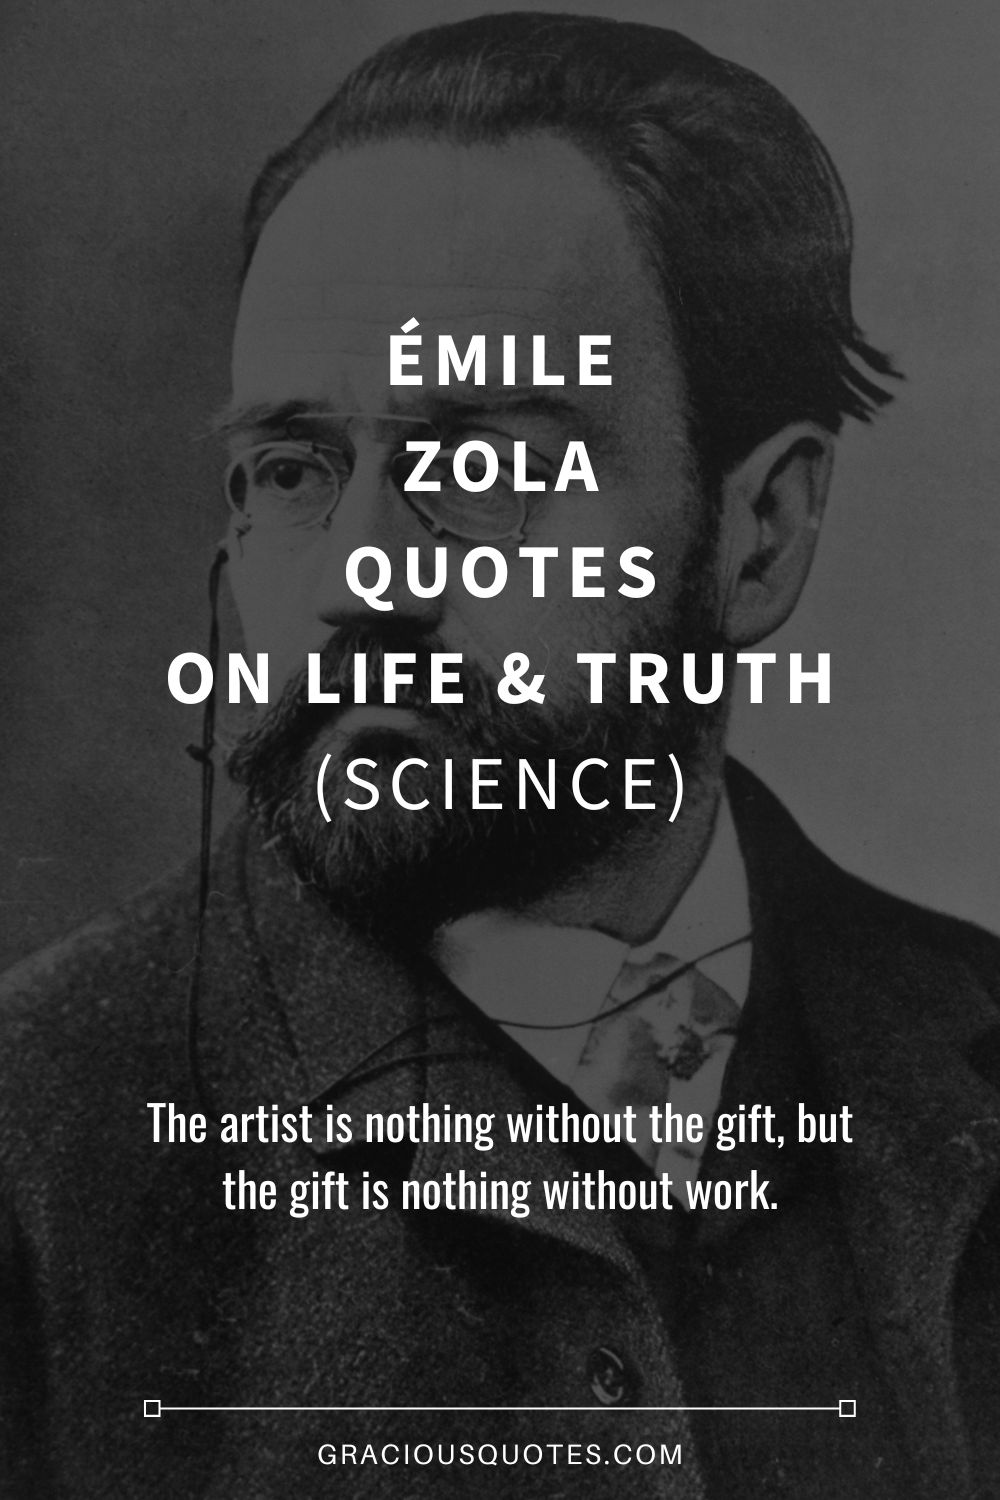 Émile Zola Quotes on Life & Truth (SCIENCE) - Gracious Quotes